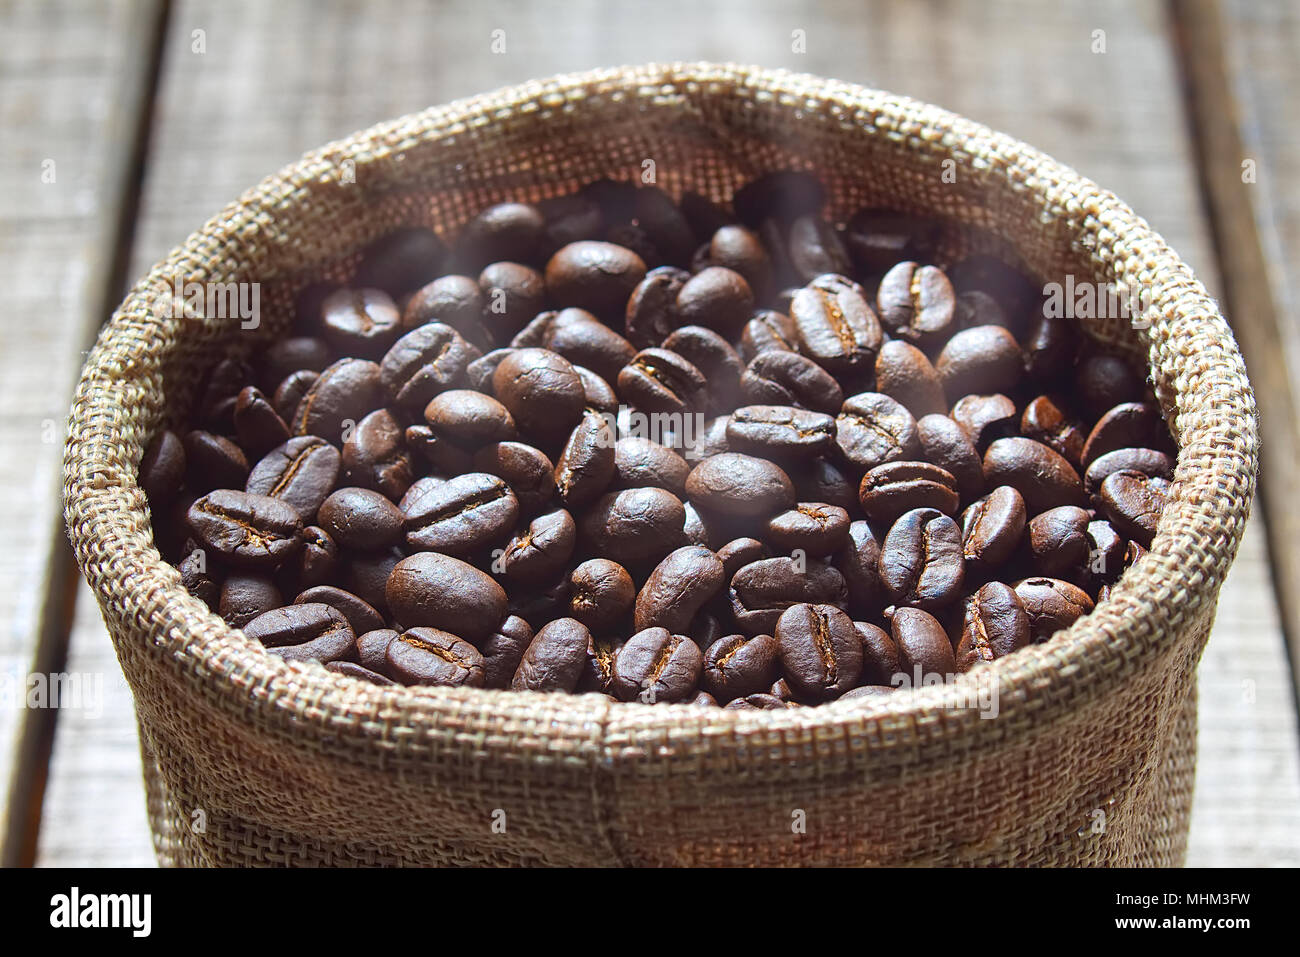 Close up fresh coffee beans keep in bag after blending on wood table. Stock Photo